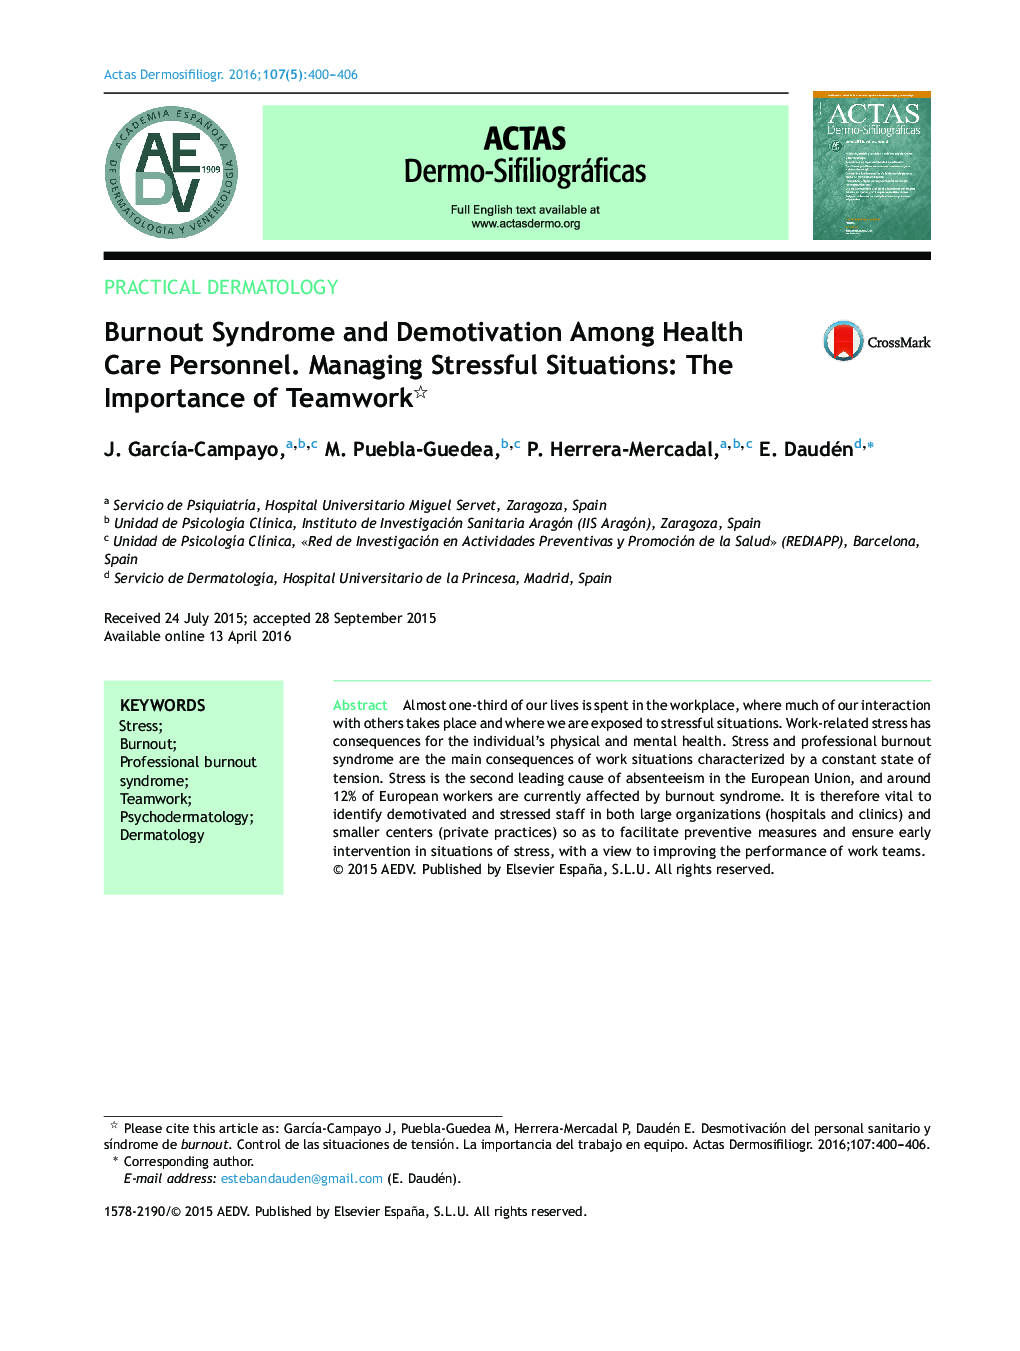 Burnout Syndrome and Demotivation Among Health Care Personnel. Managing Stressful Situations: The Importance of Teamwork 